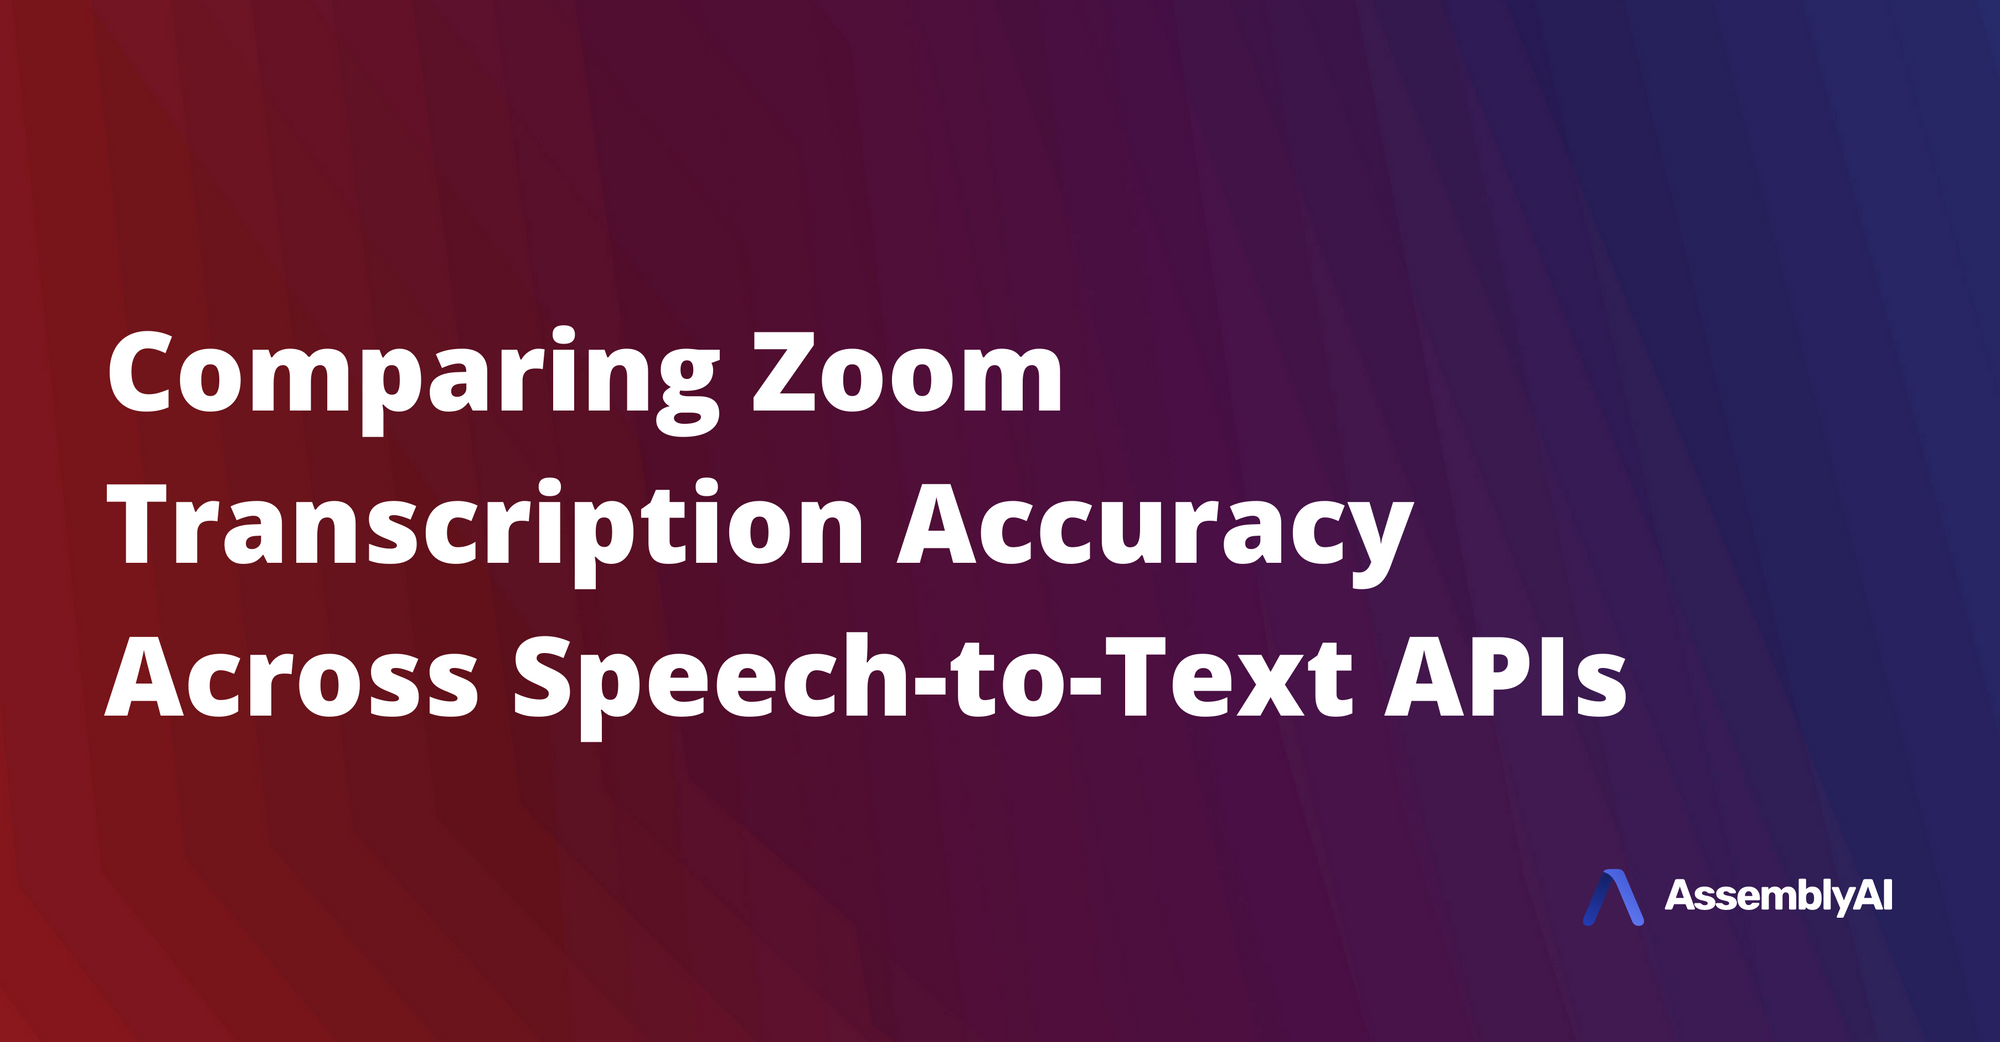 Comparing Zoom Transcription Accuracy Across Speech-to-Text APIs